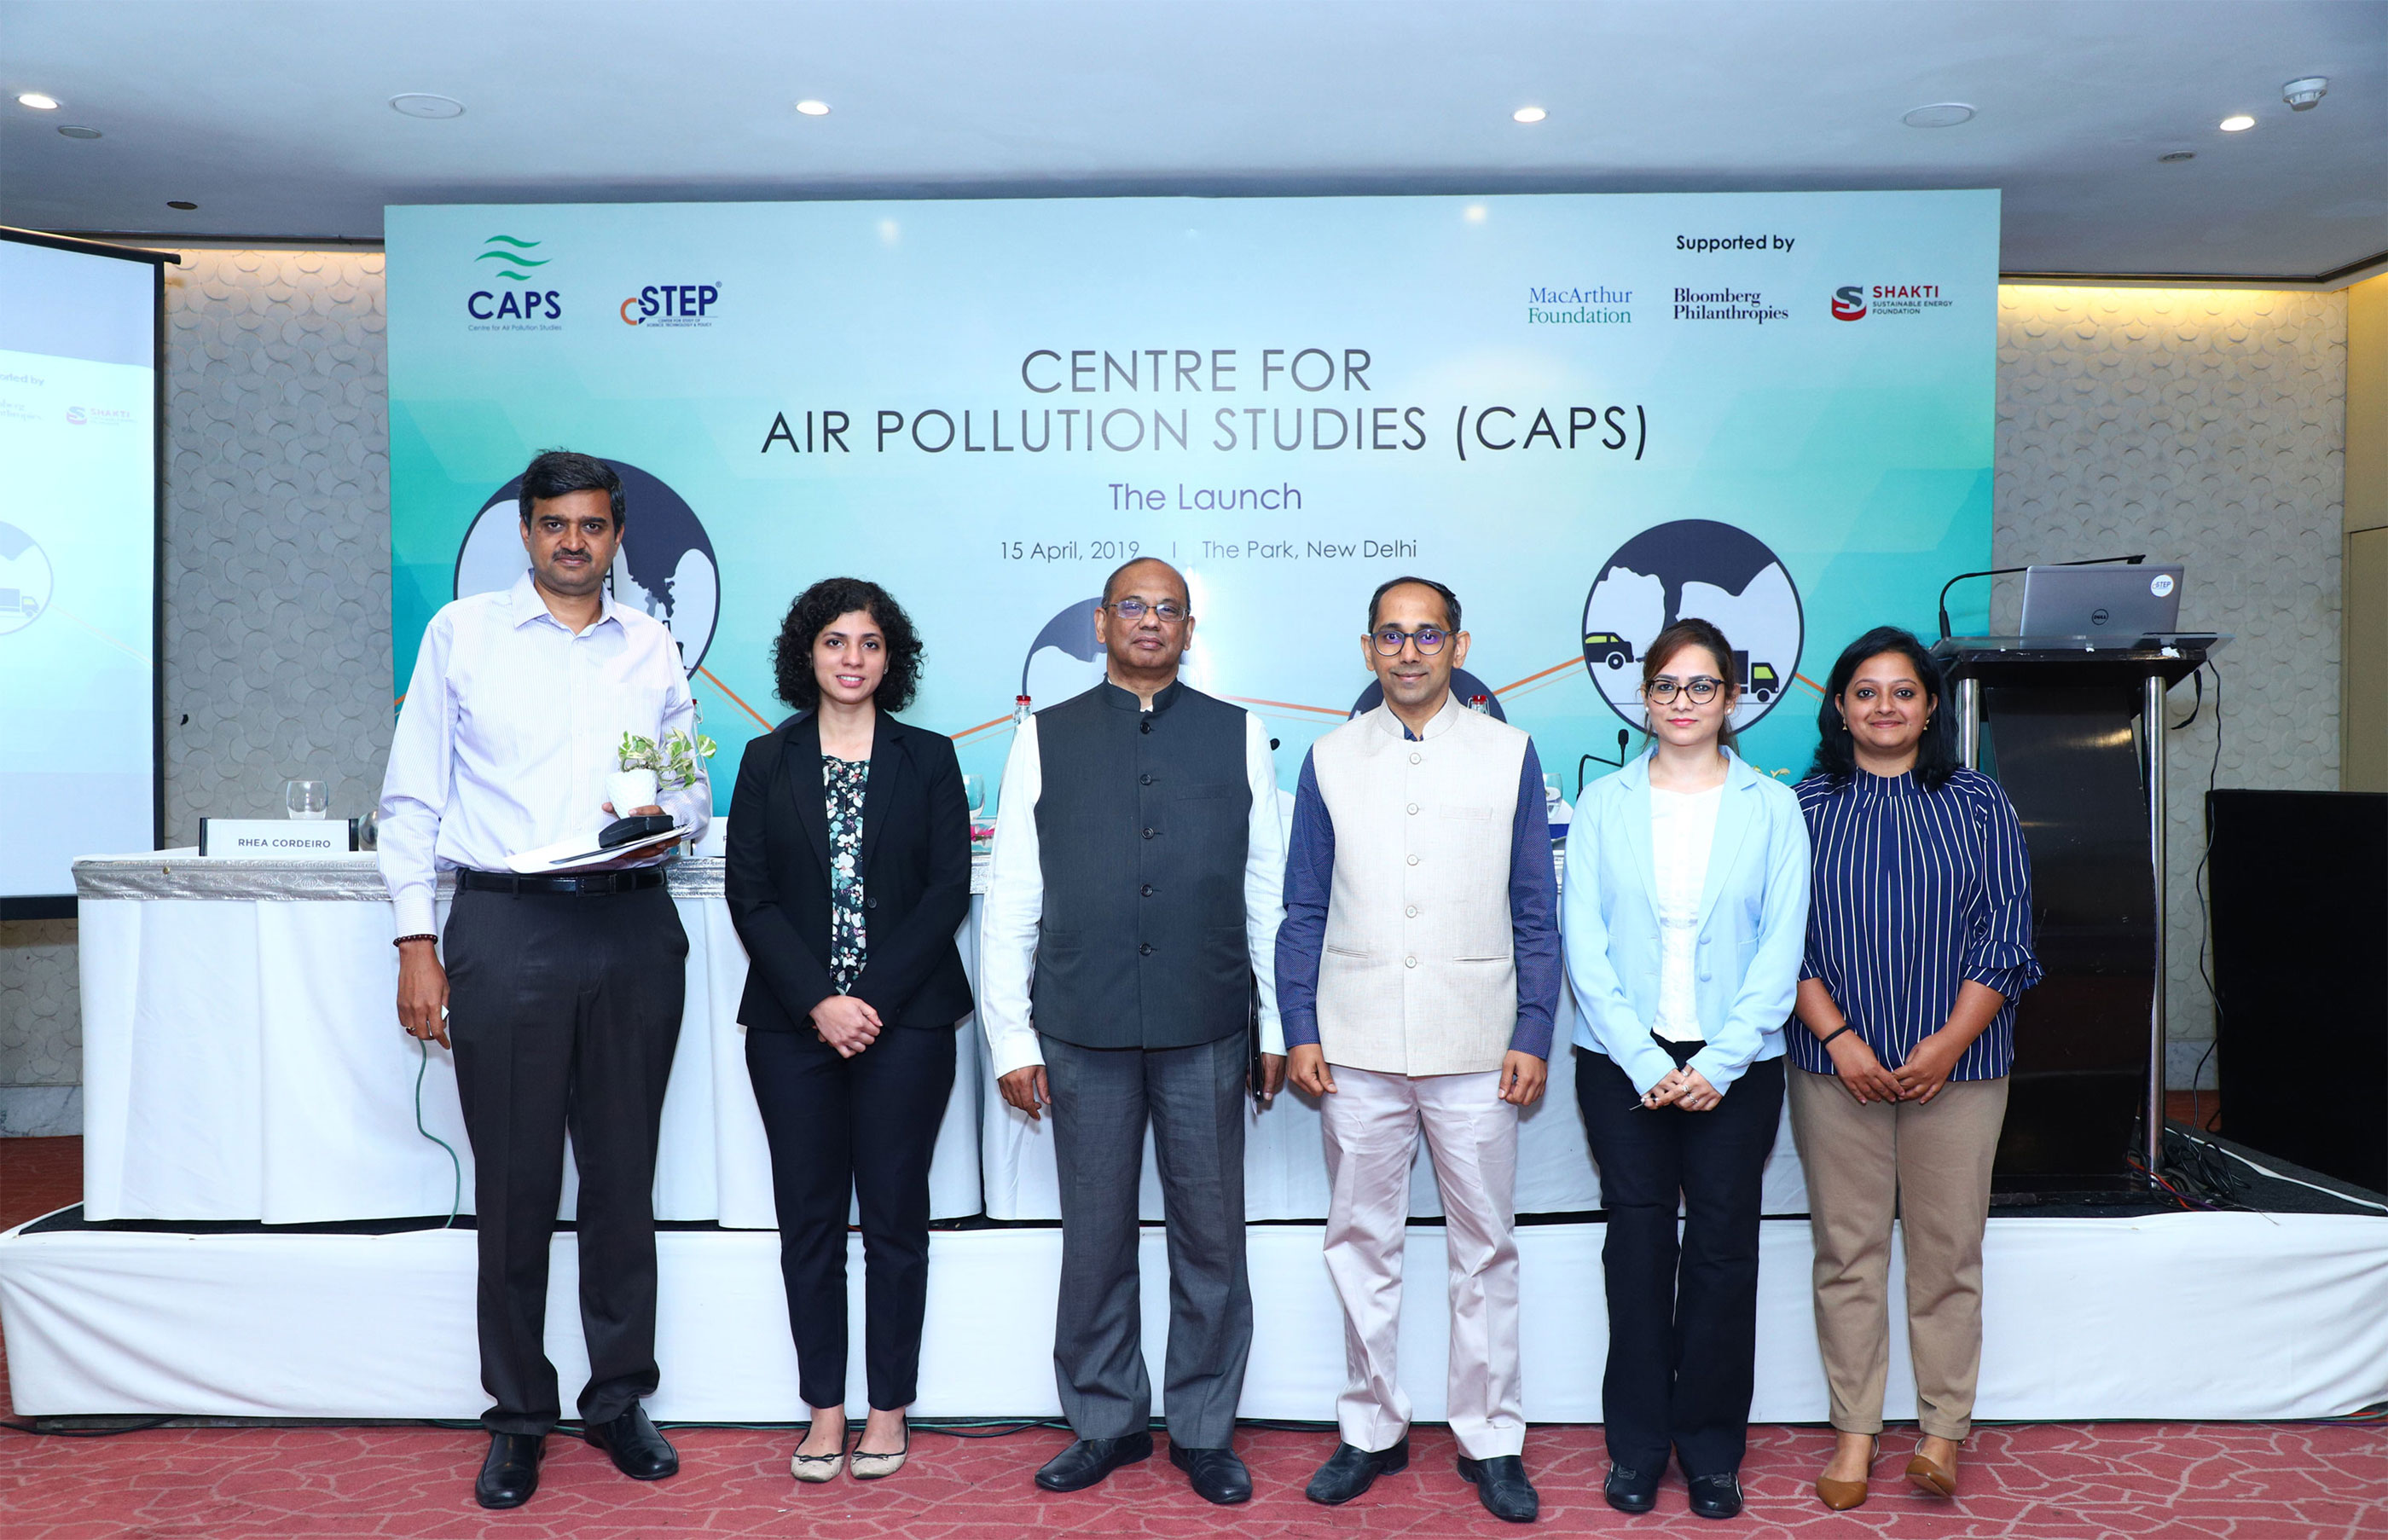 Launch Event of Centre for Air Pollution Studies (CAPS)